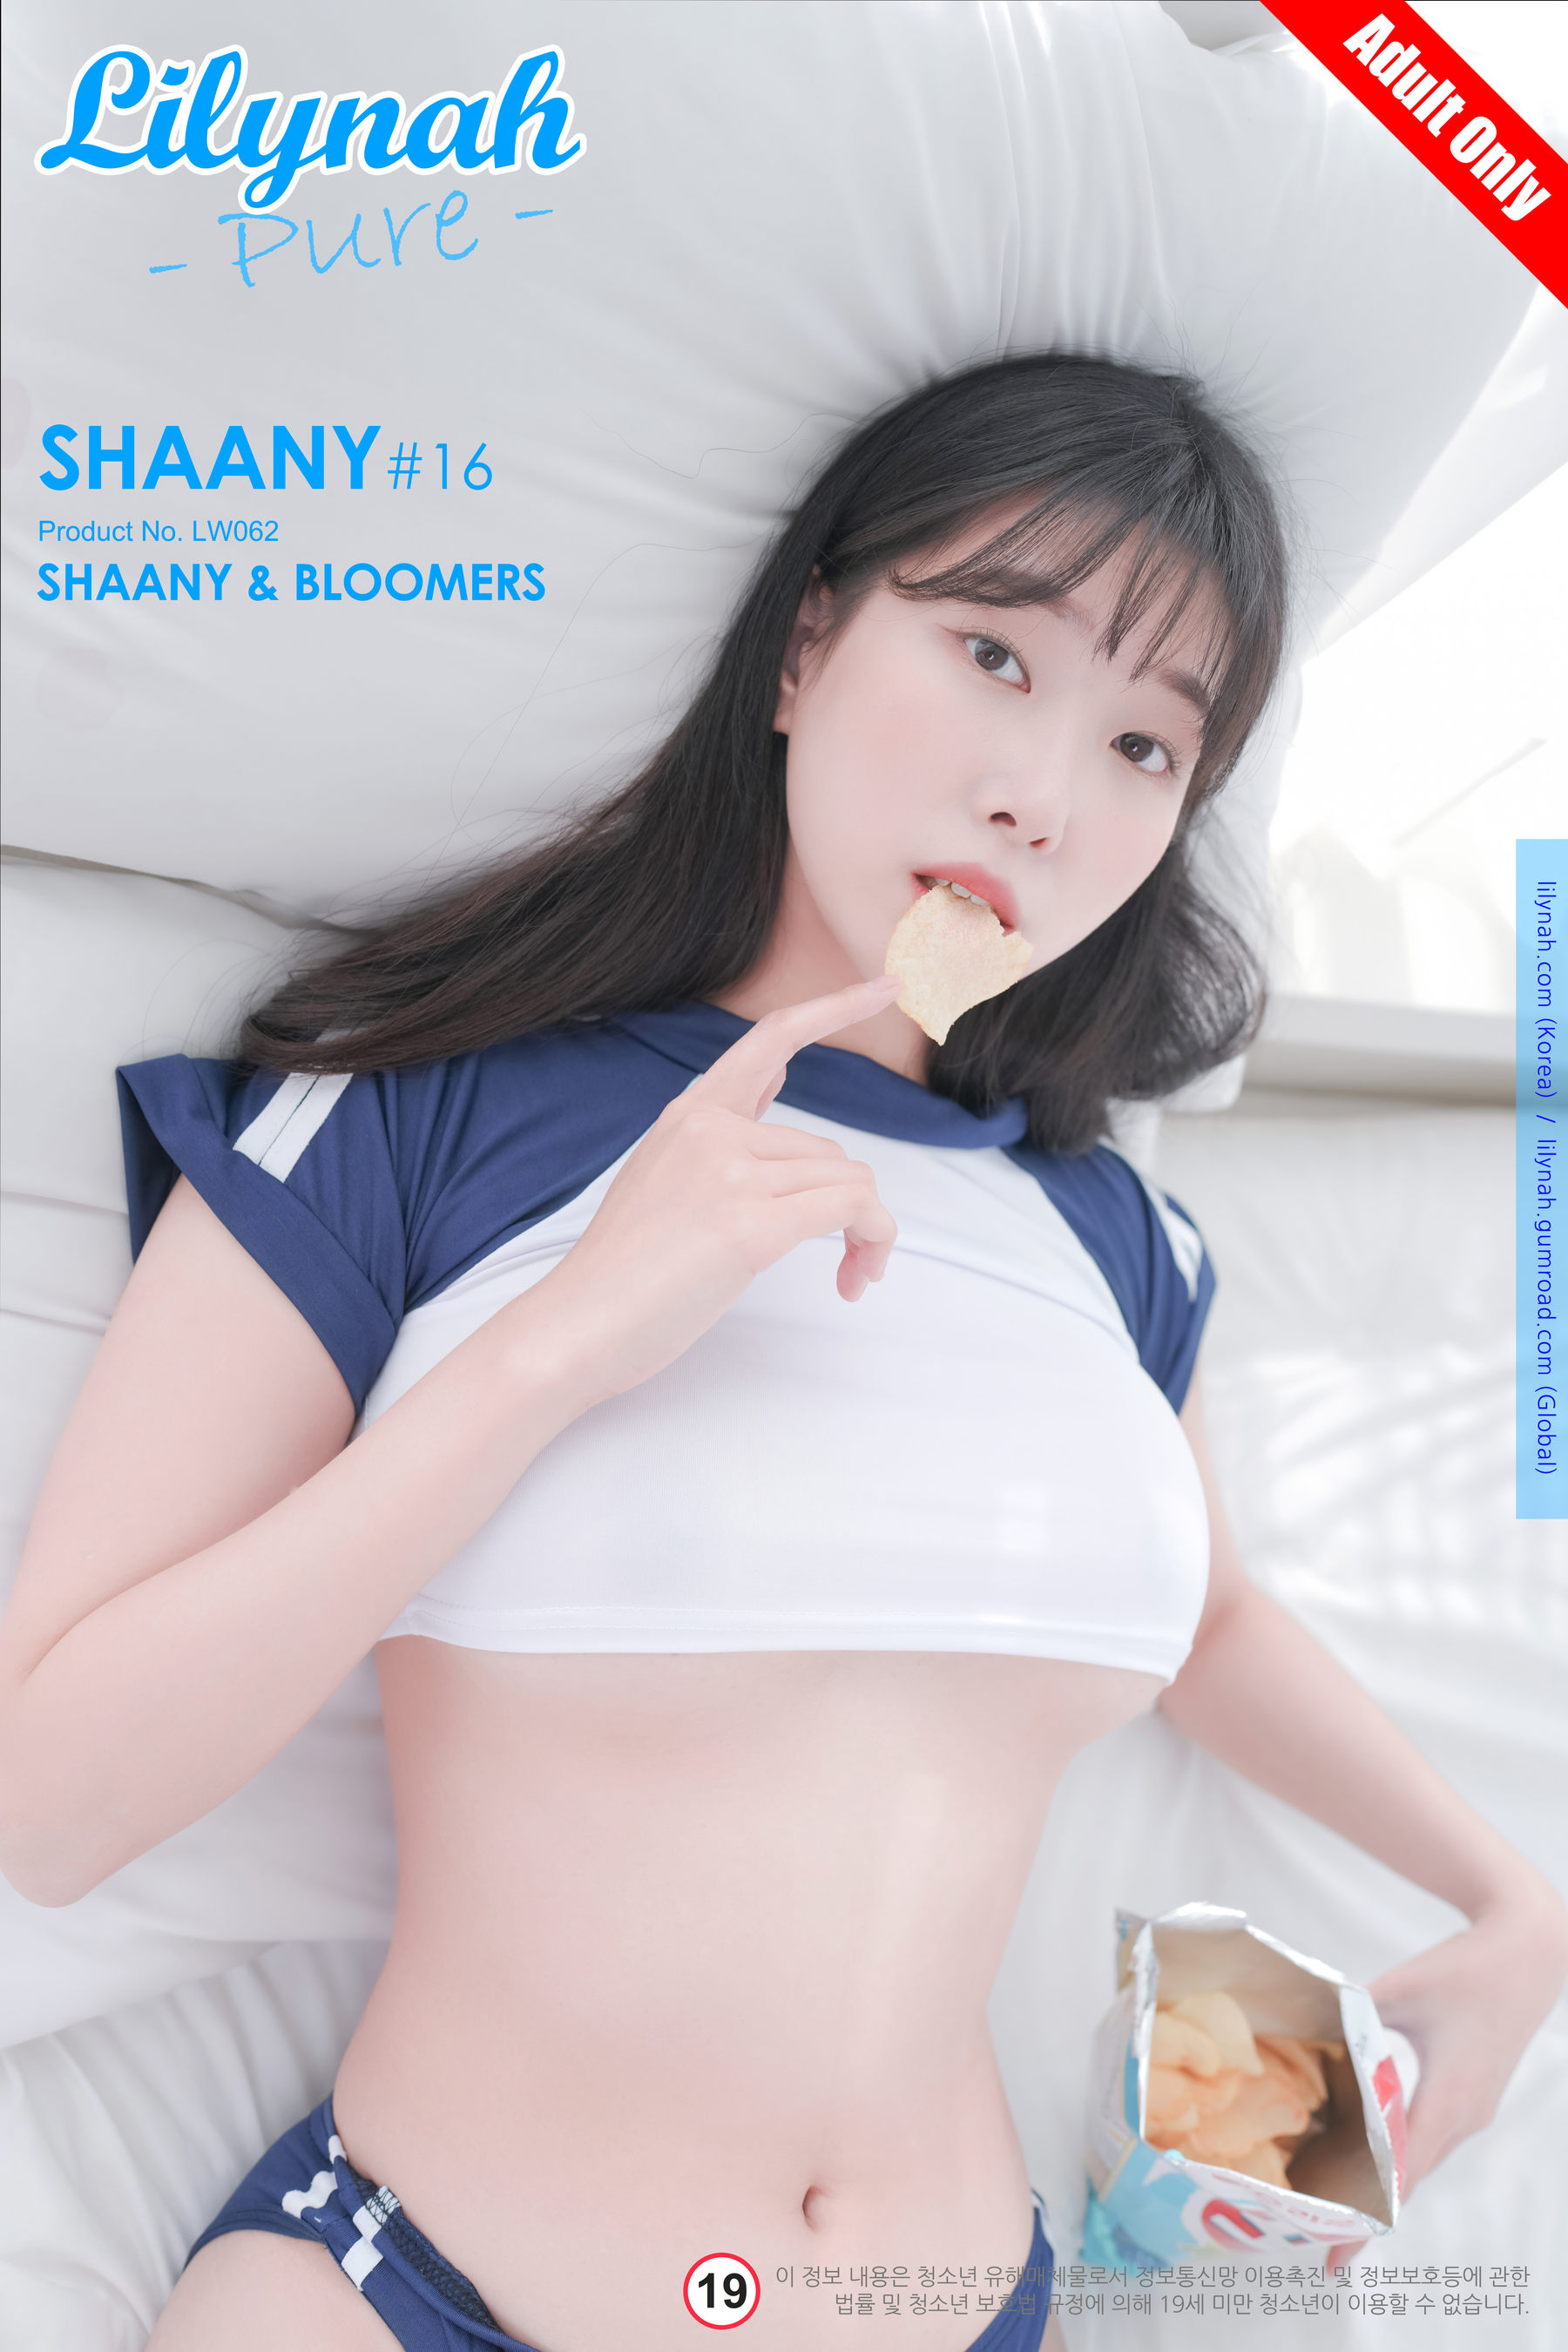 [Lilynah] Shaany - Vol.16 &amp; Bloomers  第1张